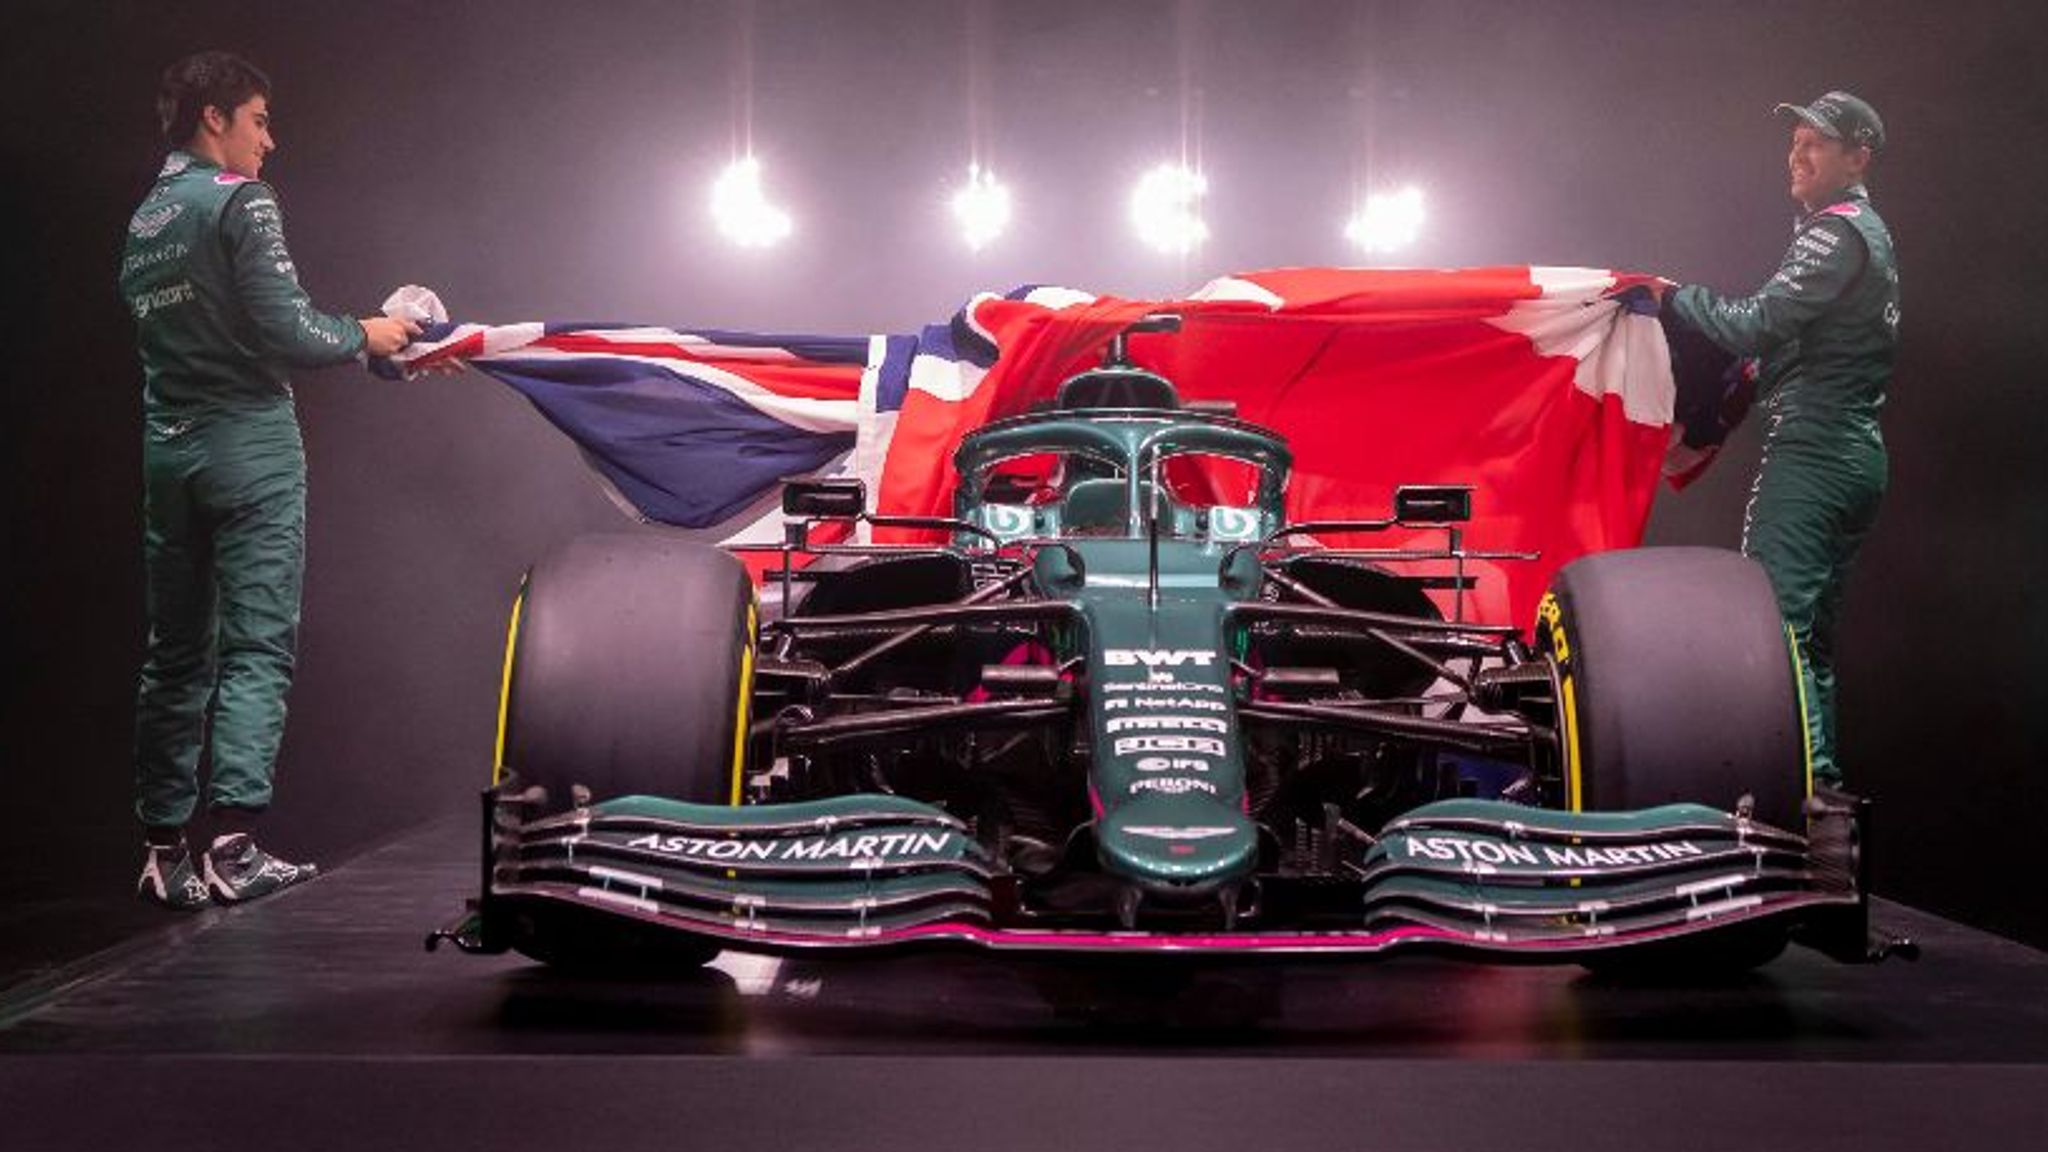 Formula 1 2021 Introducing the new cars and colours as launch season delivers striking contenders F1 News